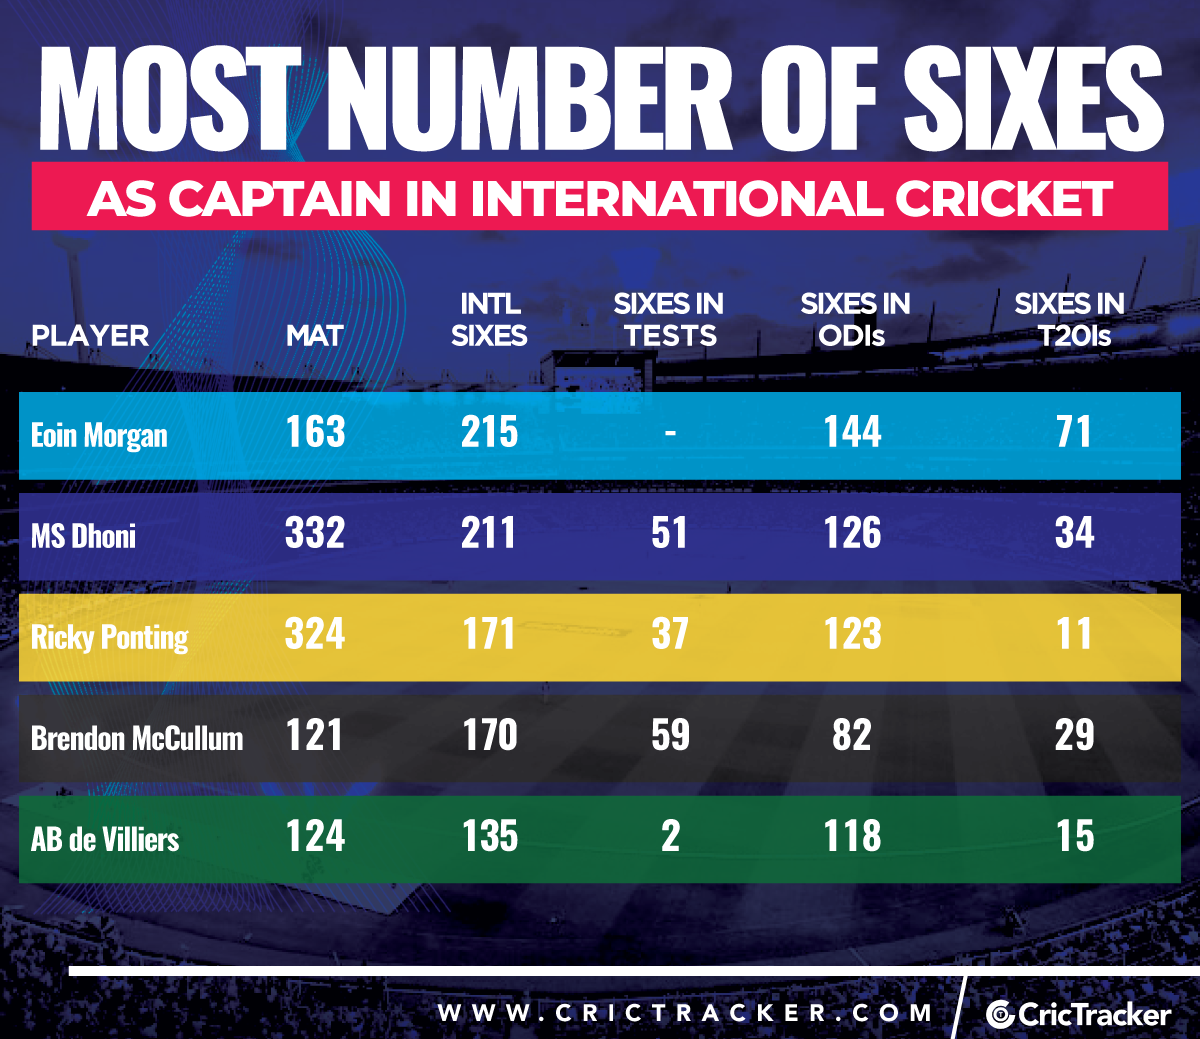 Most number of sixes hit as captain in International cricket - Updated as on 4th August, 2020